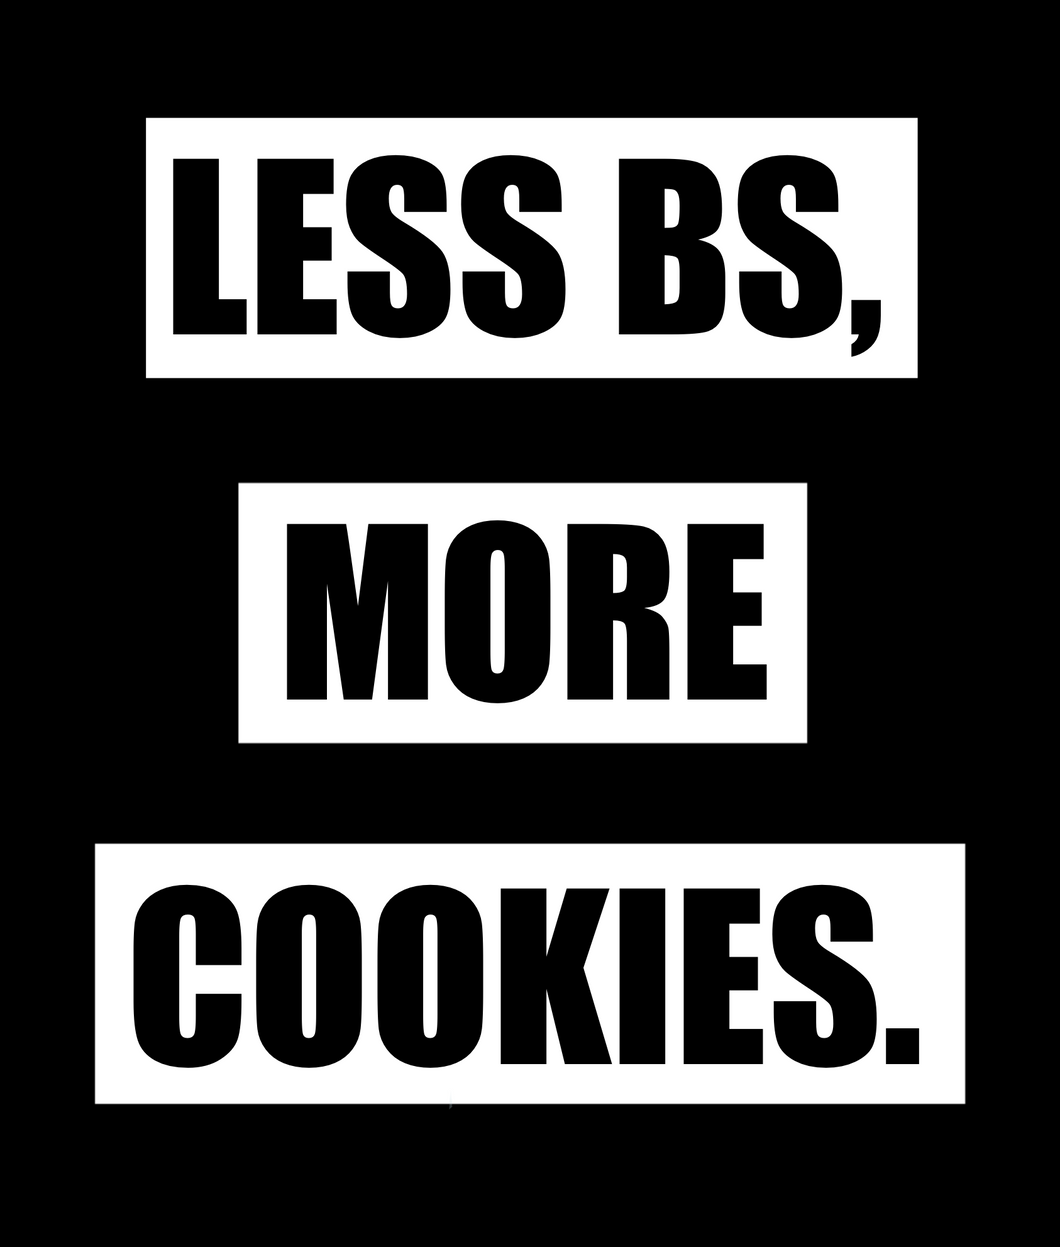 Less BS More Cookies